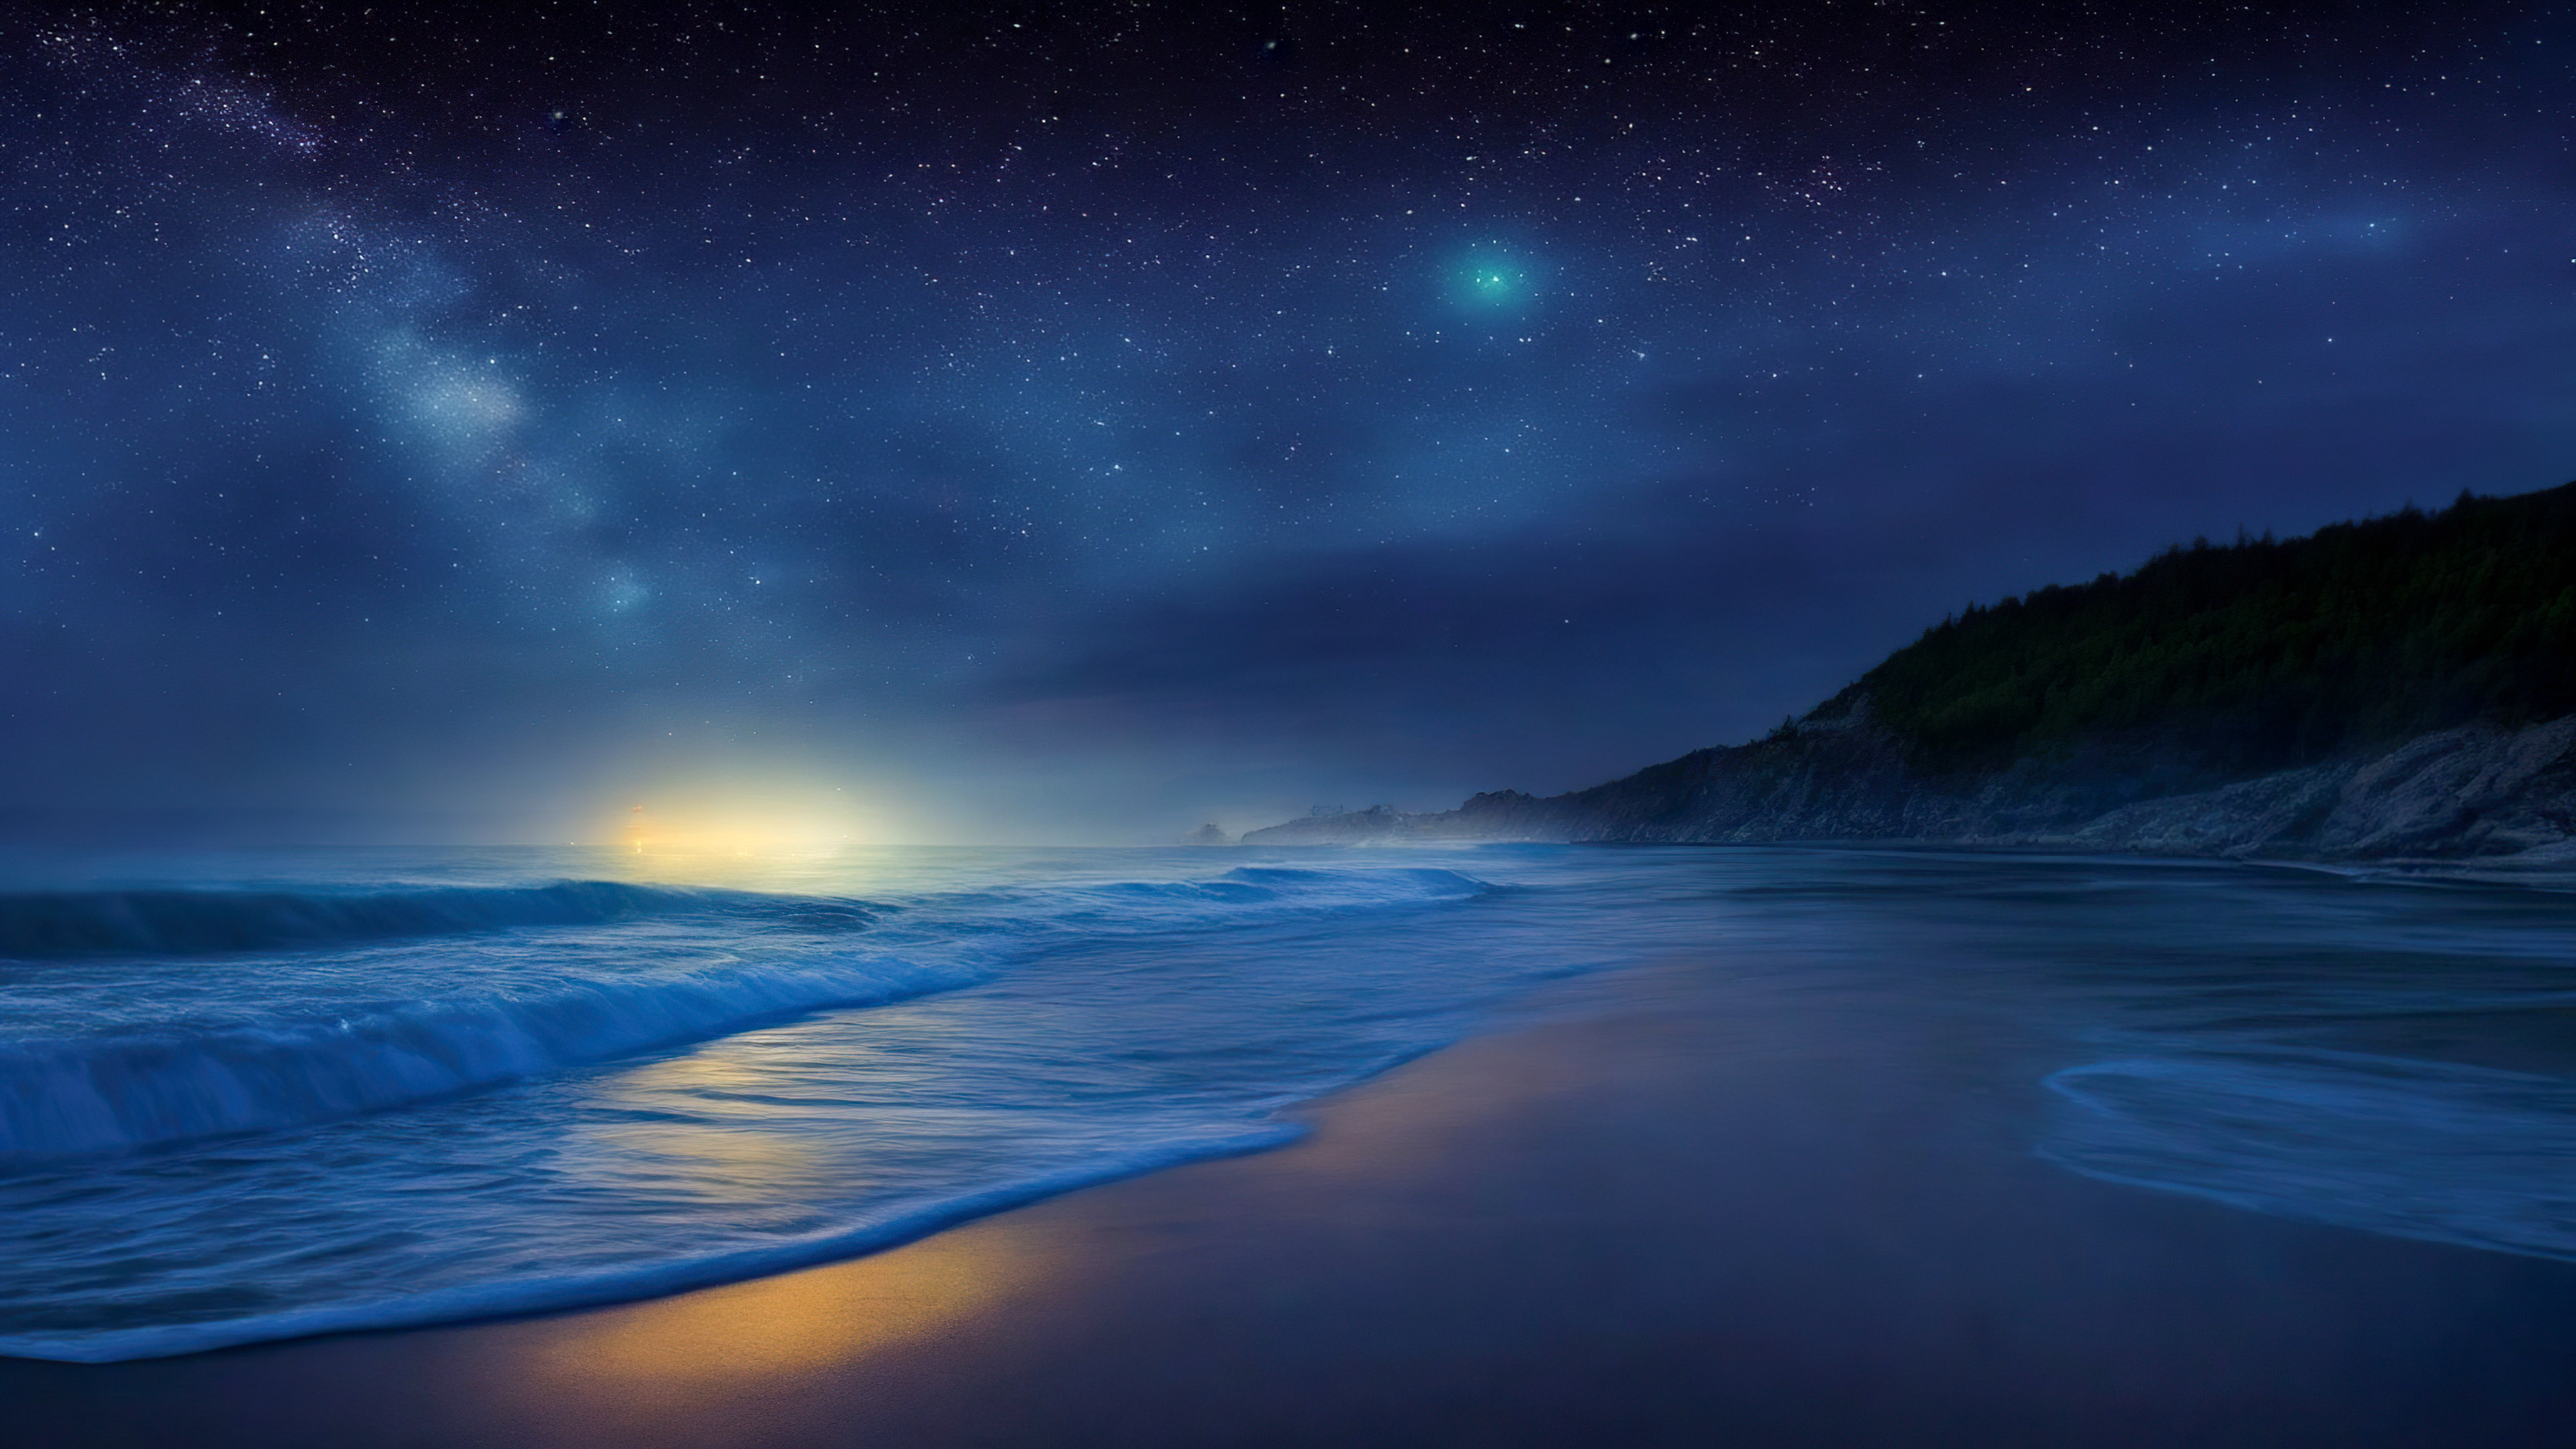 Download our background, capturing a remote beach at night, where the waves meet the shoreline under a canvas of twinkling stars.